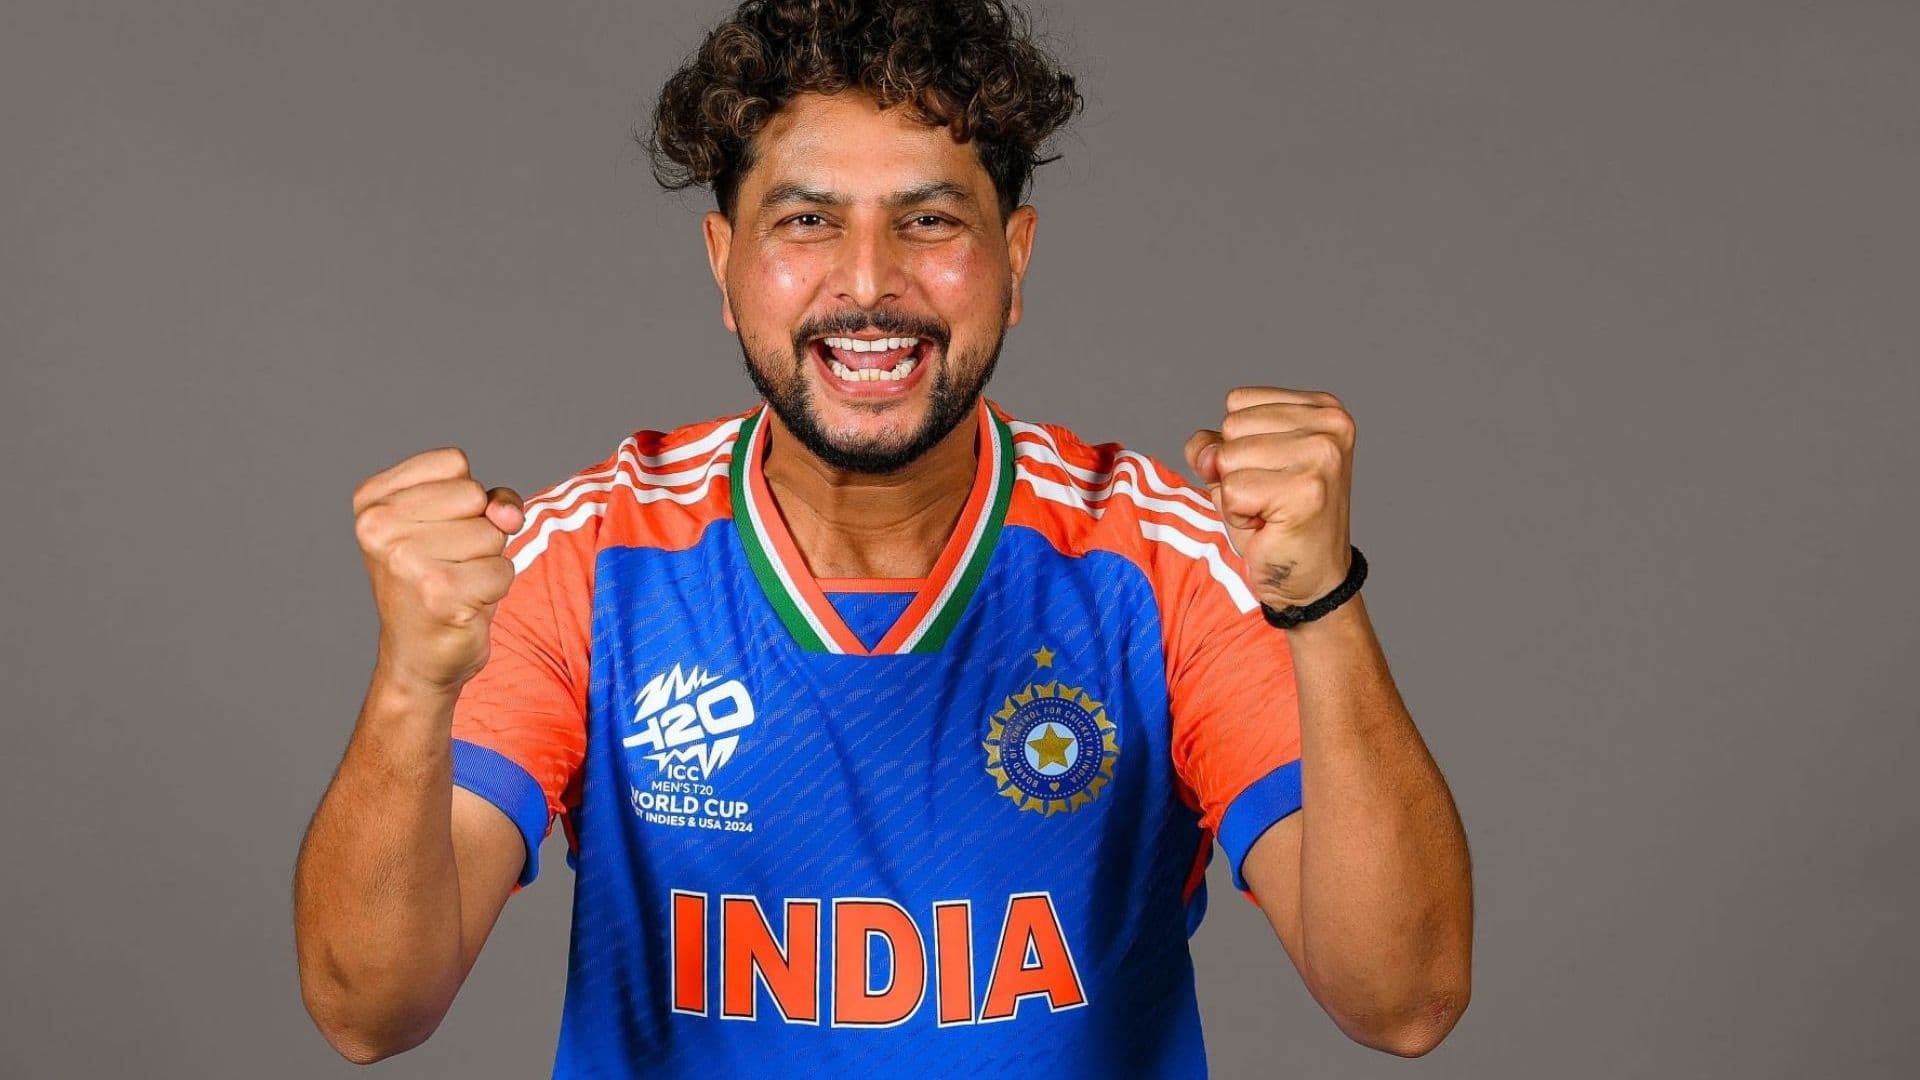 Will Kuldeep Yadav Play In India's 1st Super 8 Match vs Afghanistan? Report Reveals